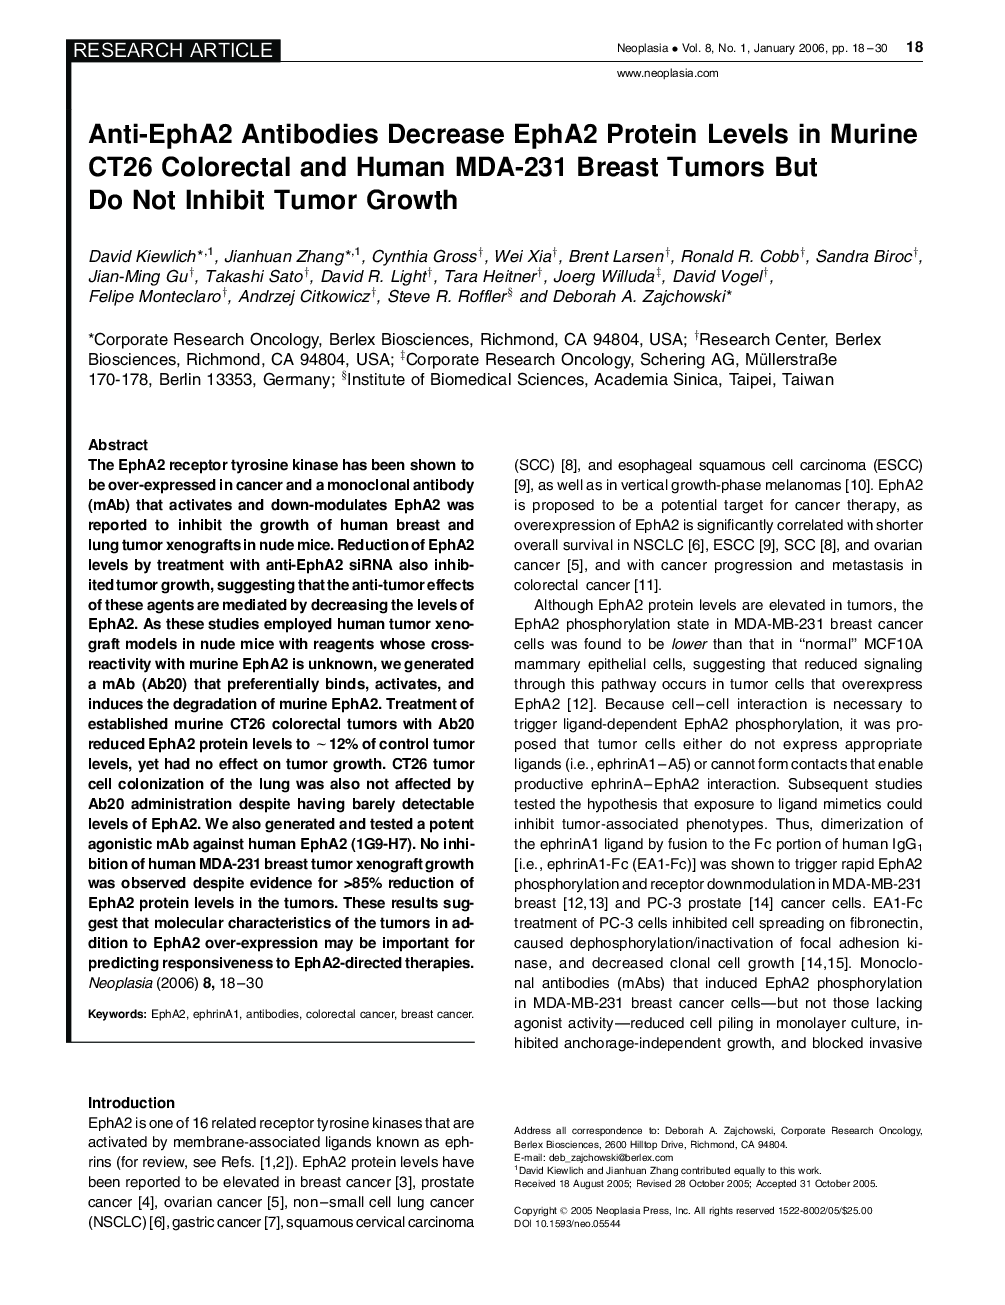 Anti-EphA2 Antibodies Decrease EphA2 Protein Levels in Murine CT26 Colorectal and Human MDA-231 Breast Tumors But Do Not Inhibit Tumor Growth